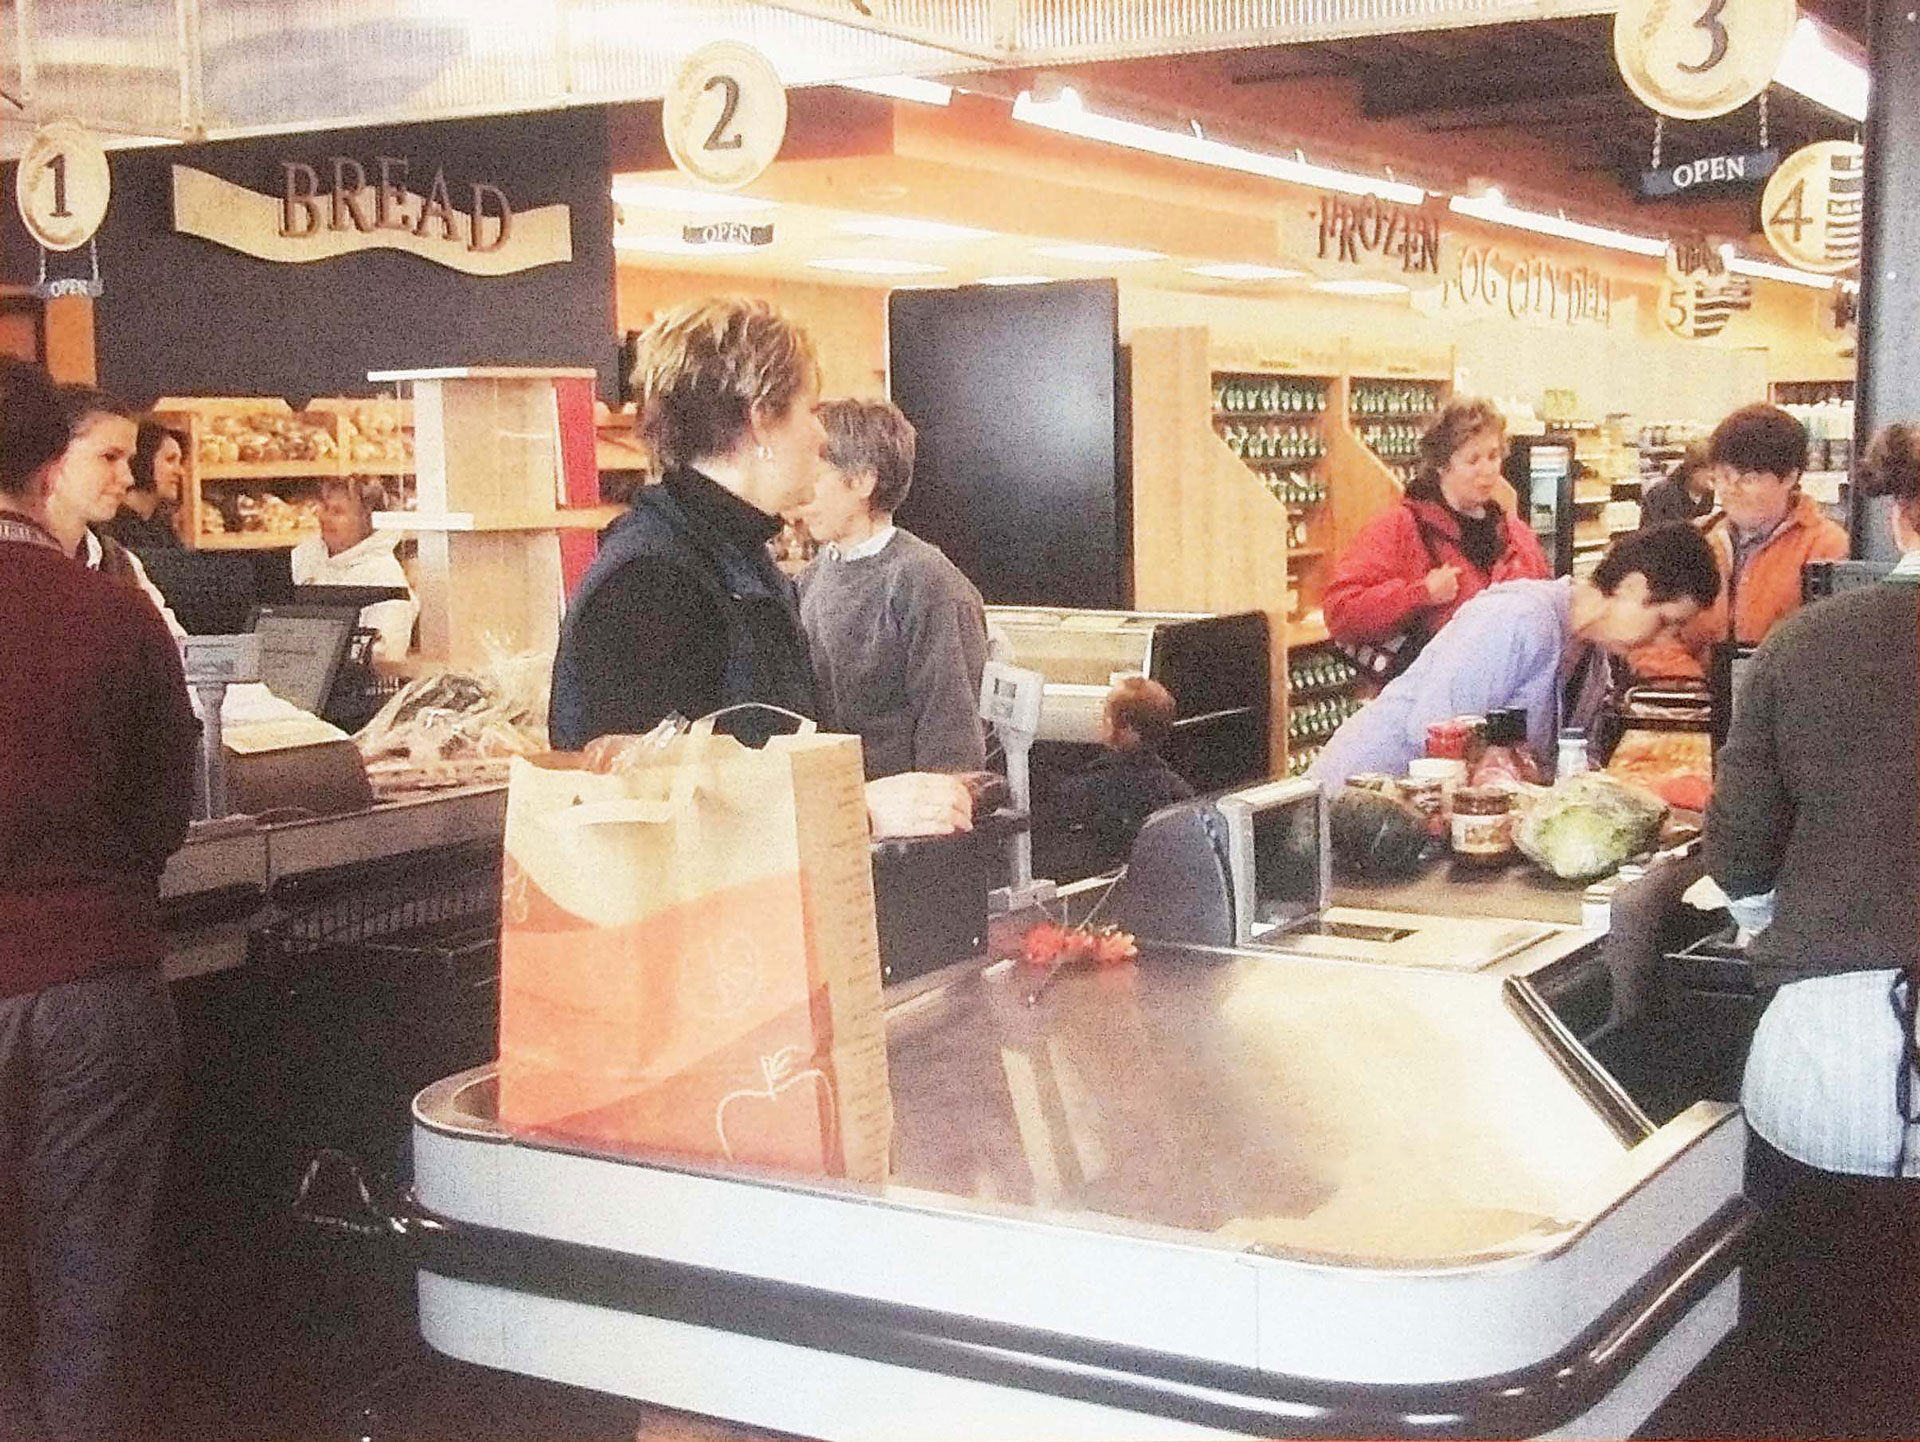 People are waiting in line at the checkout counters in Whole Foods Coop Duluth MN. They are purchasing various items, including produce. Signage for different sections like "Bread" and "Frozen Food Center" is visible. The atmosphere appears busy but orderly.